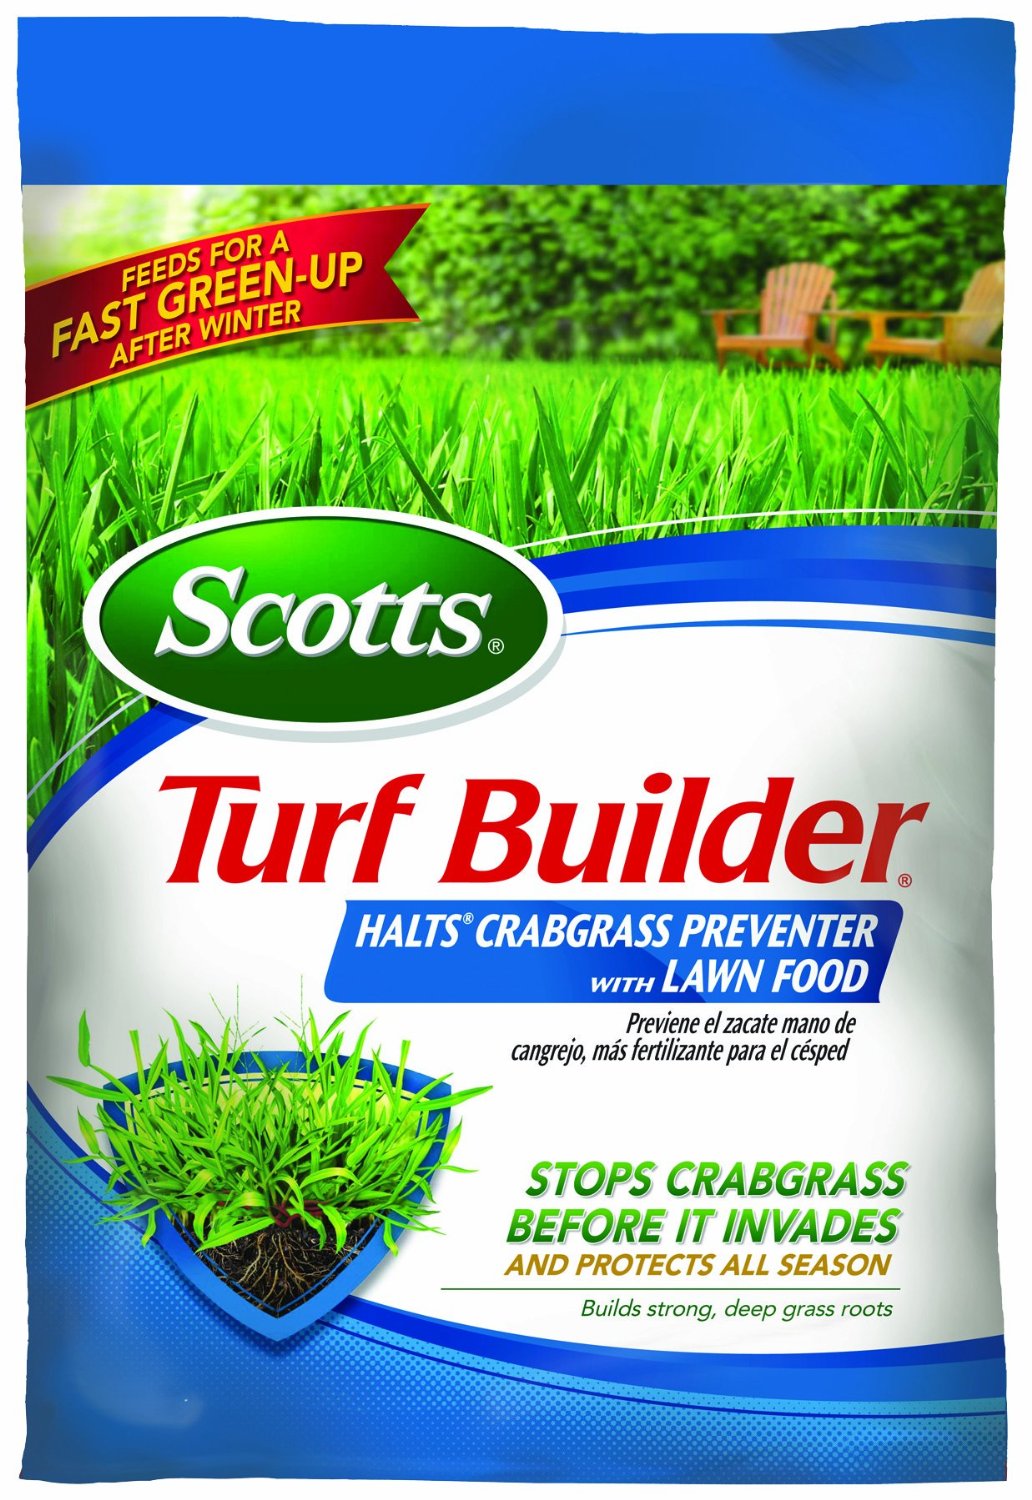 buy turf builders lawn fertilizer at cheap rate in bulk. wholesale & retail lawn & plant care items store.